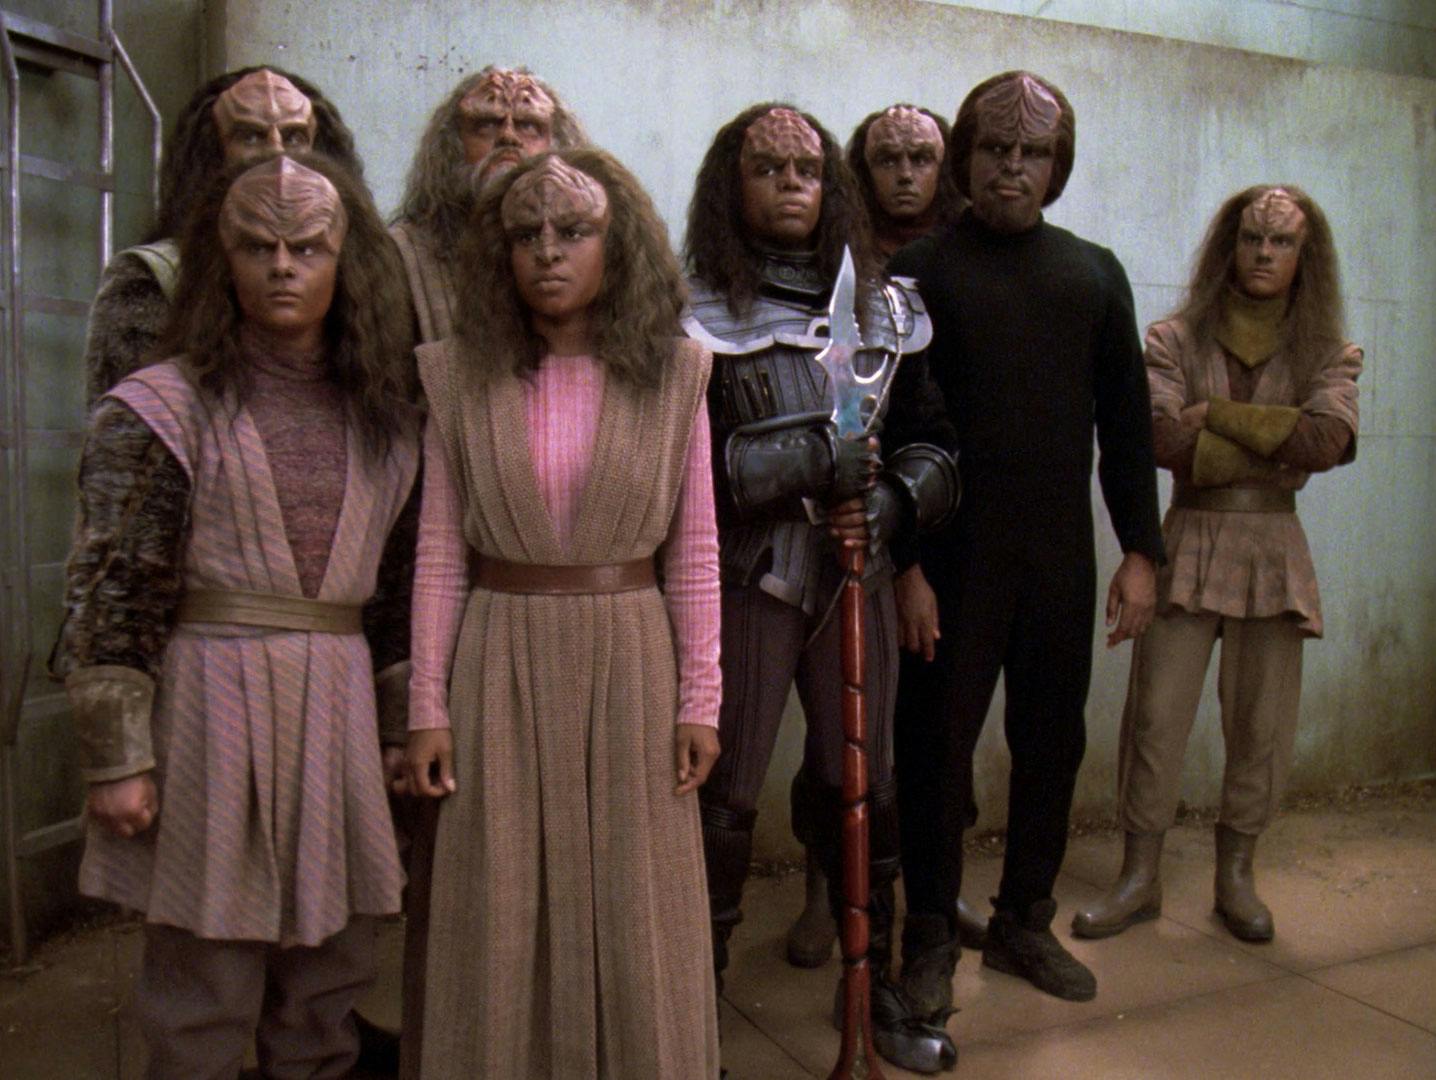 In a Romulan prison camp, several Klingons stand besides Worf after he teaches them about their culture in 'Birthright, Part II'